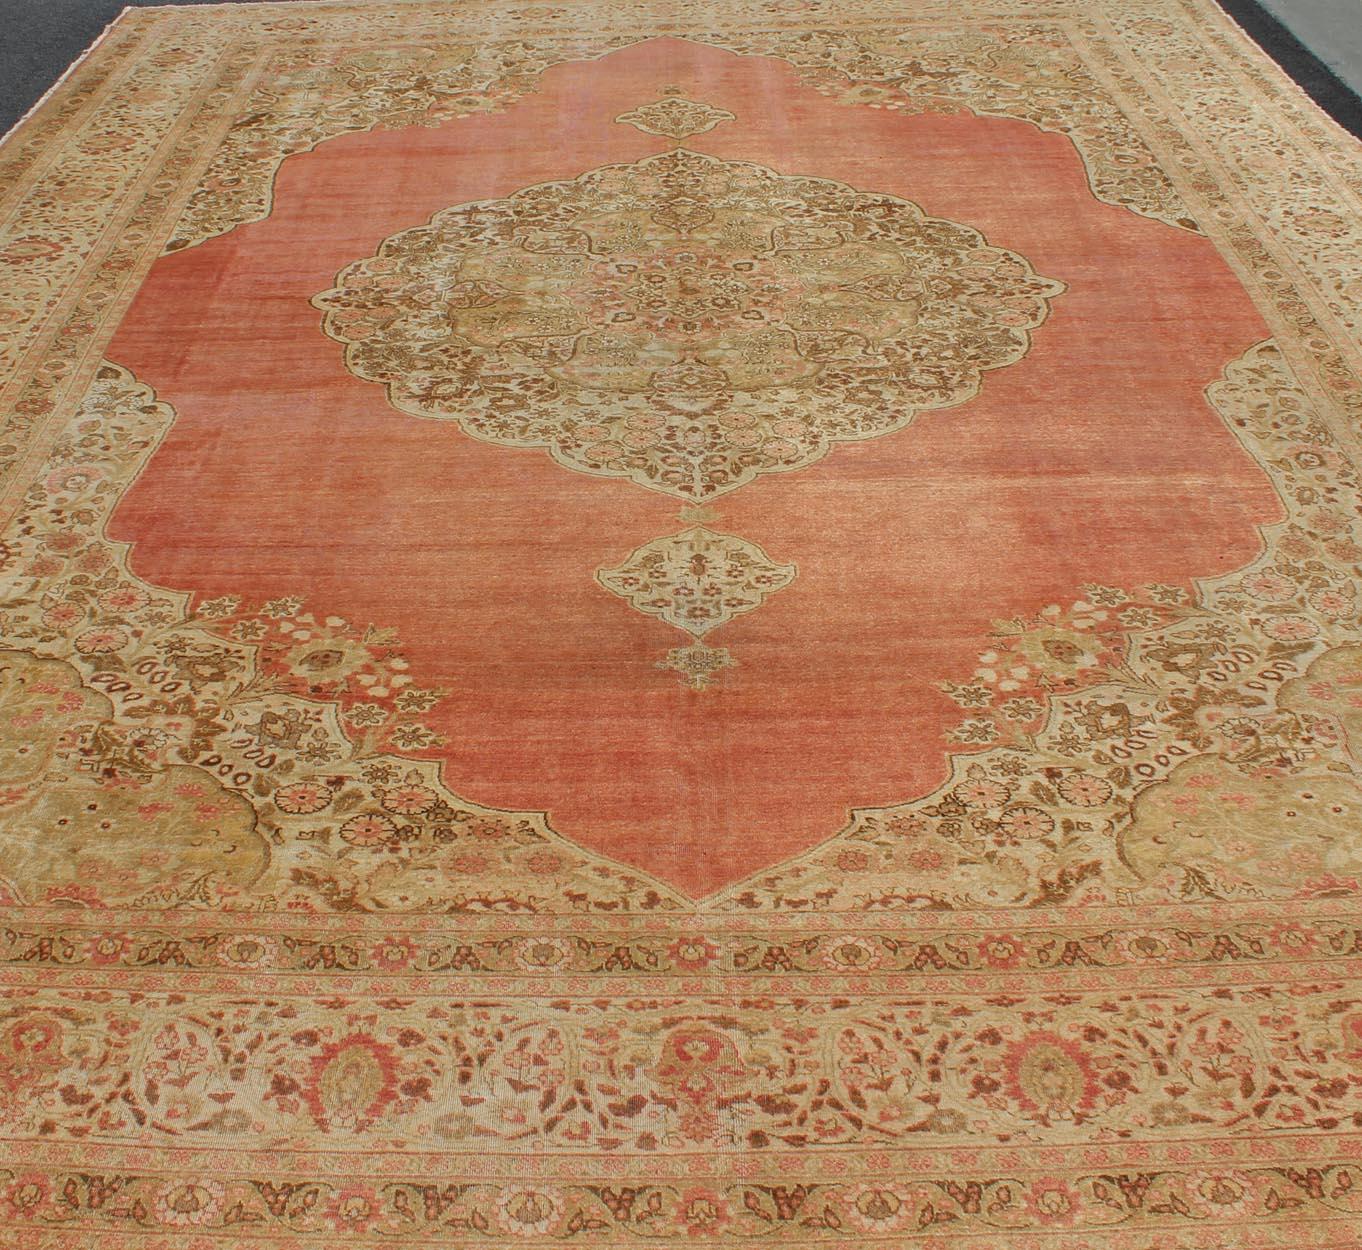 Large Antique Turkish Sivas Rug with Medallion Design in Pink Red & Yellow Green For Sale 4